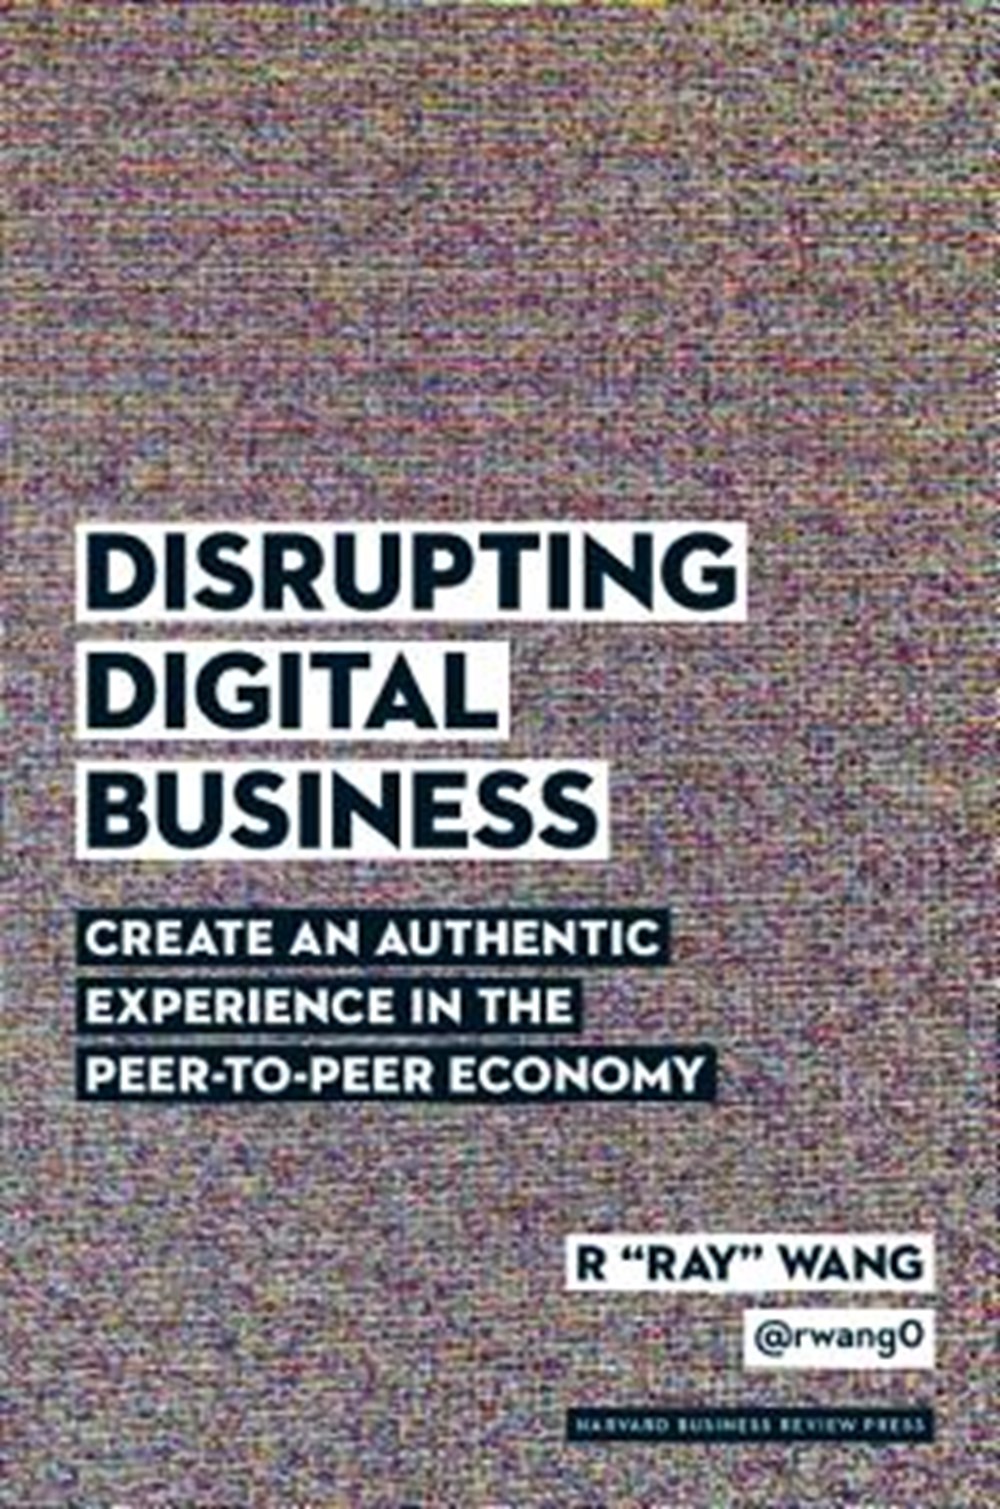 Disrupting Digital Business Create an Authentic Experience in the Peer-To-Peer Economy